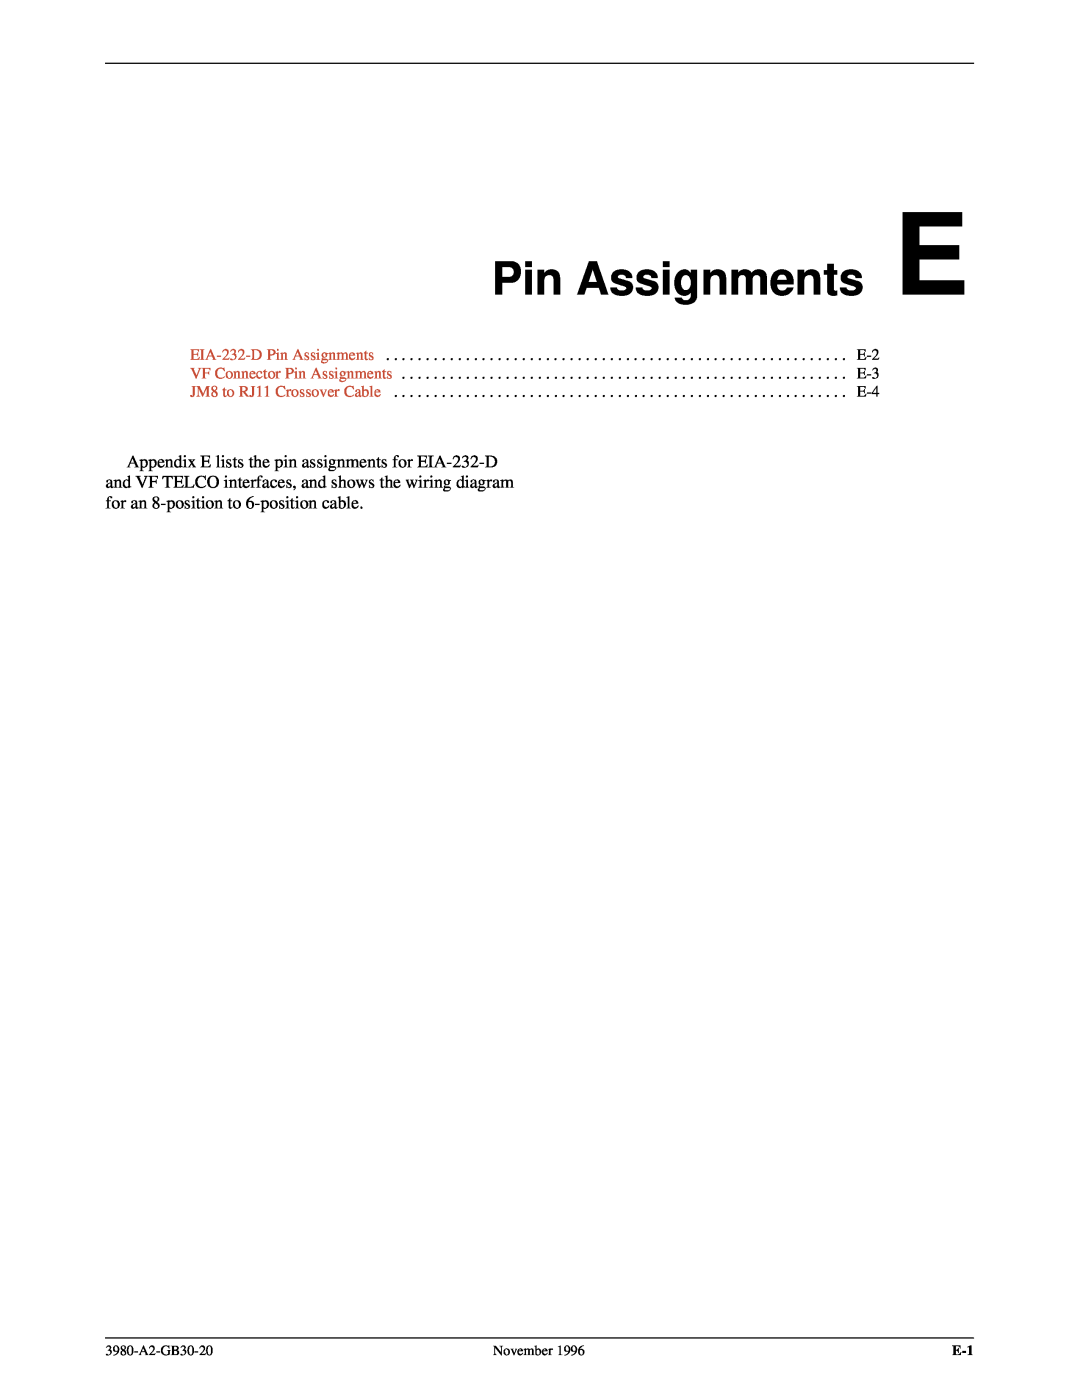 Paradyne 3800PLUS Pin Assignments E, EIA-232-D Pin Assignments, VF Connector Pin Assignments, JM8 to RJ11 Crossover Cable 